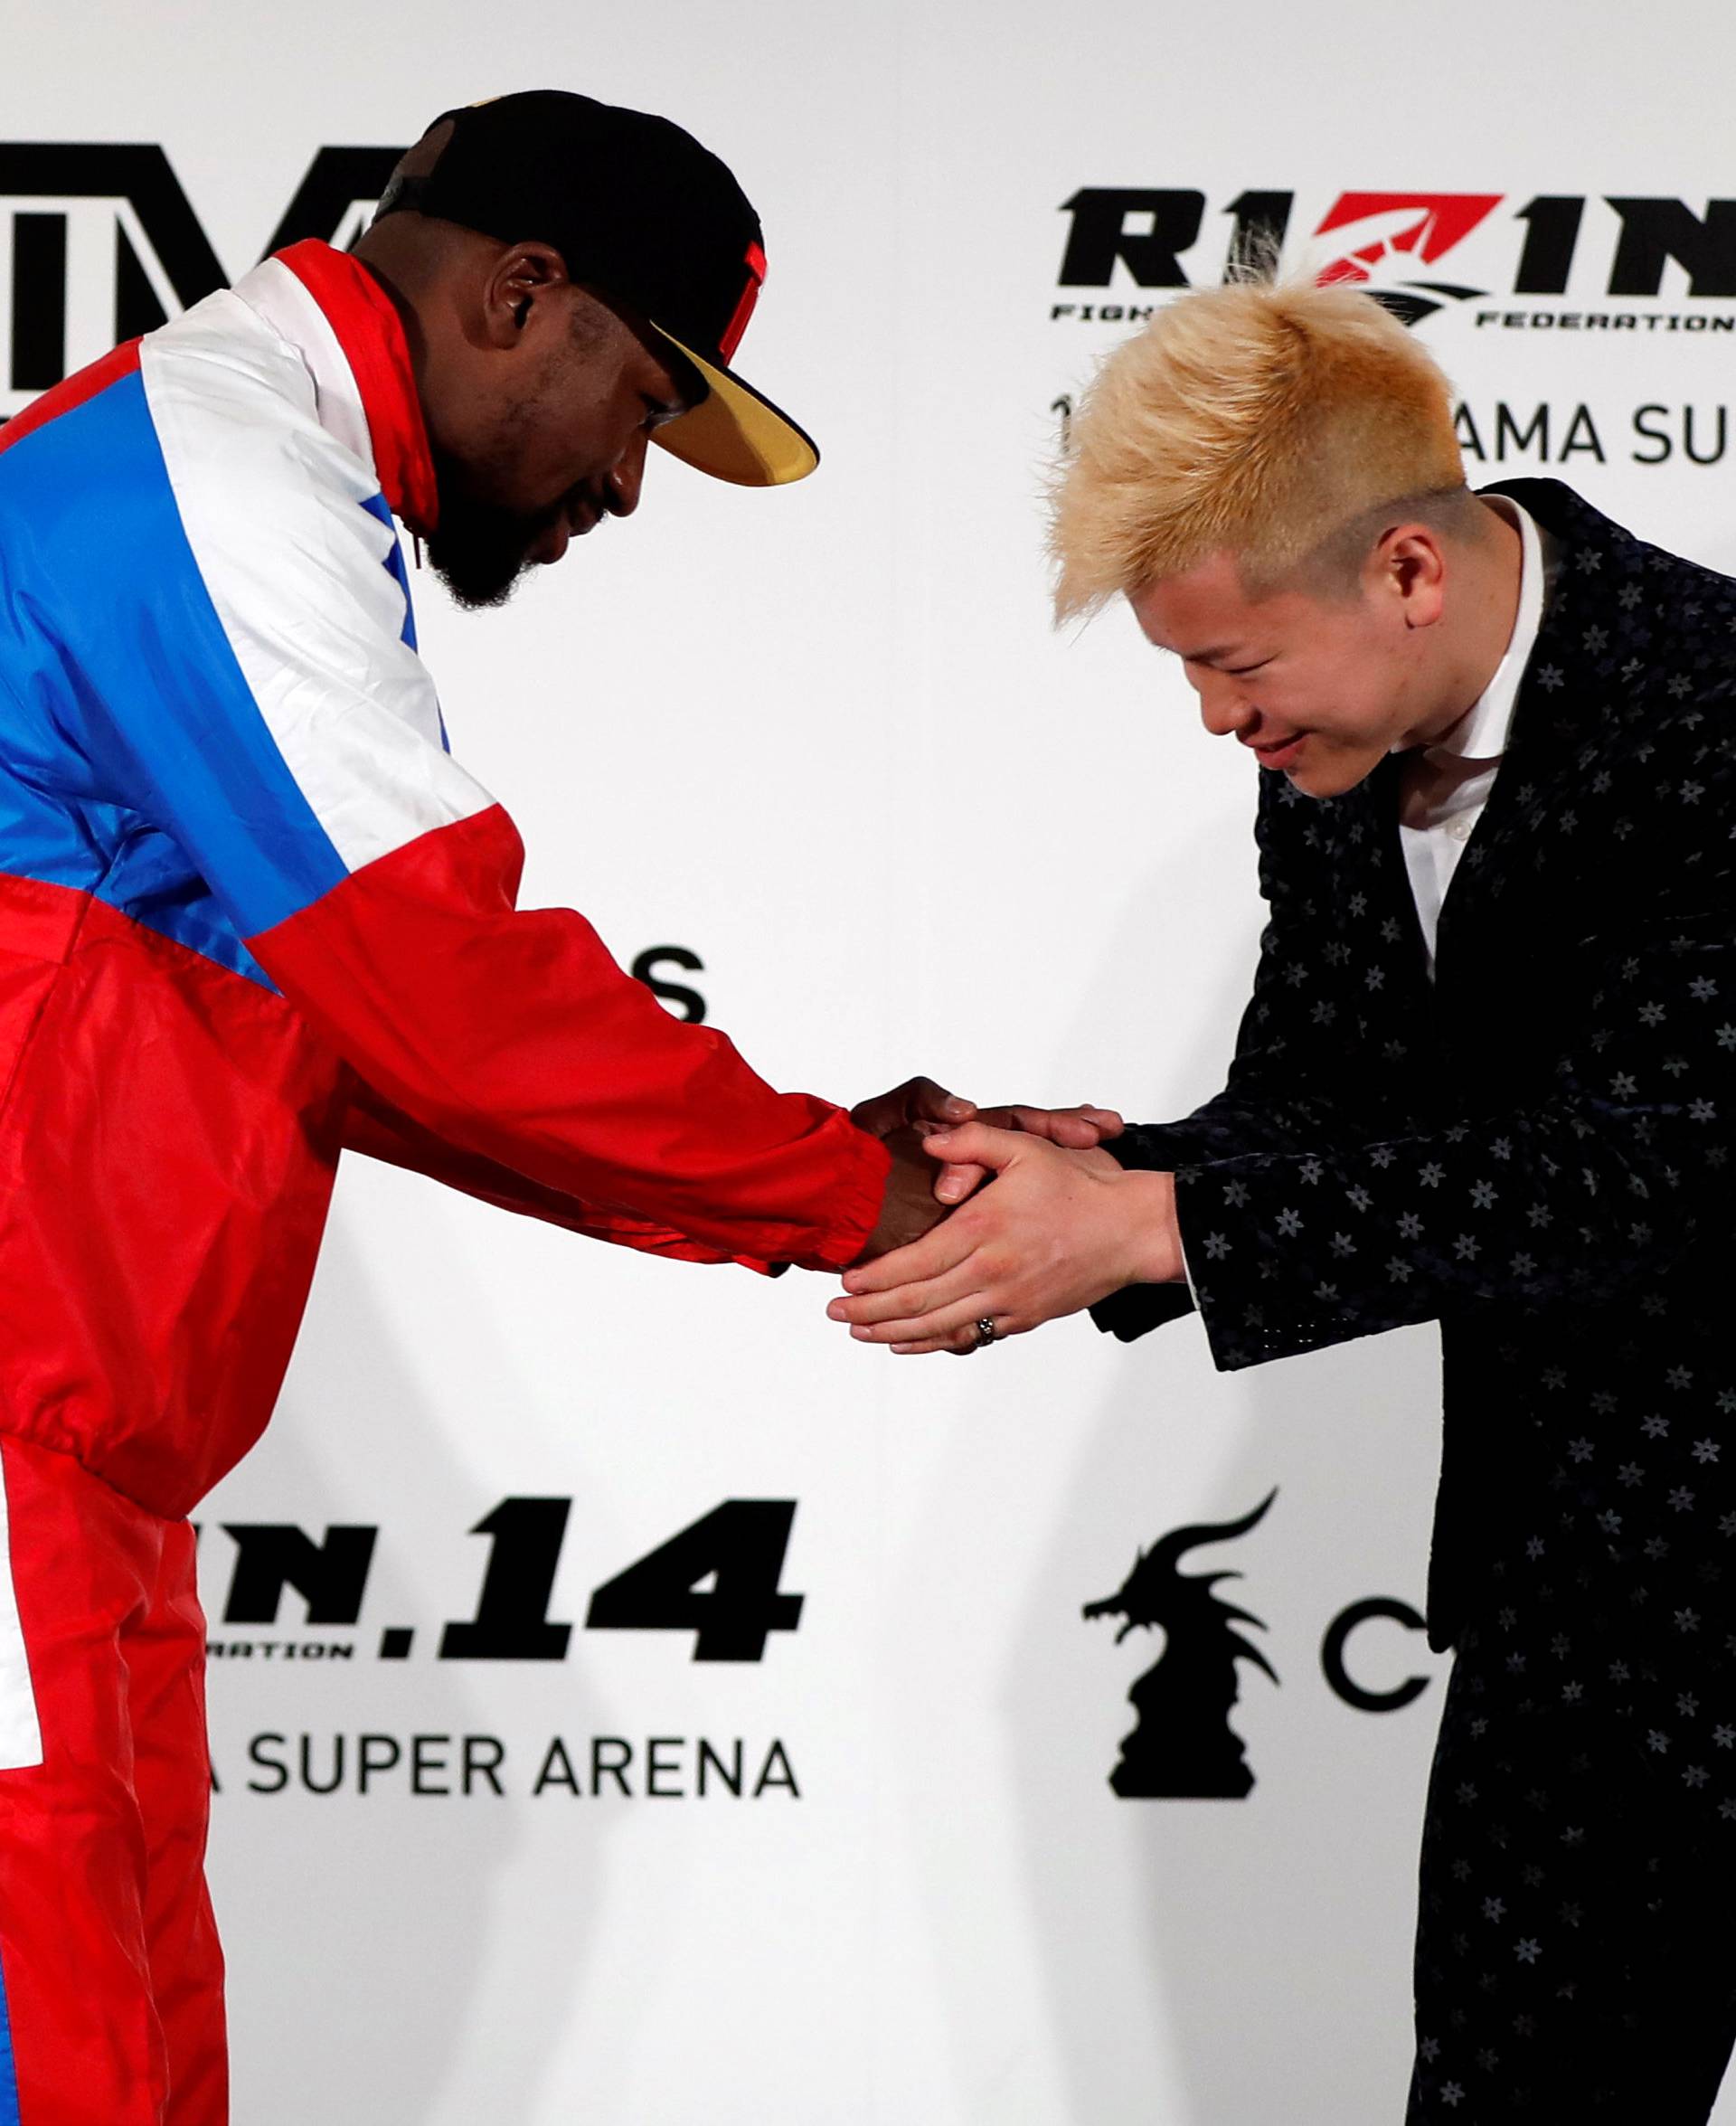 Boxer Floyd Mayweather Jr. of the U.S. shakes hands with his opponent Tenshin Nasukawa during a news conference inn Tokyo